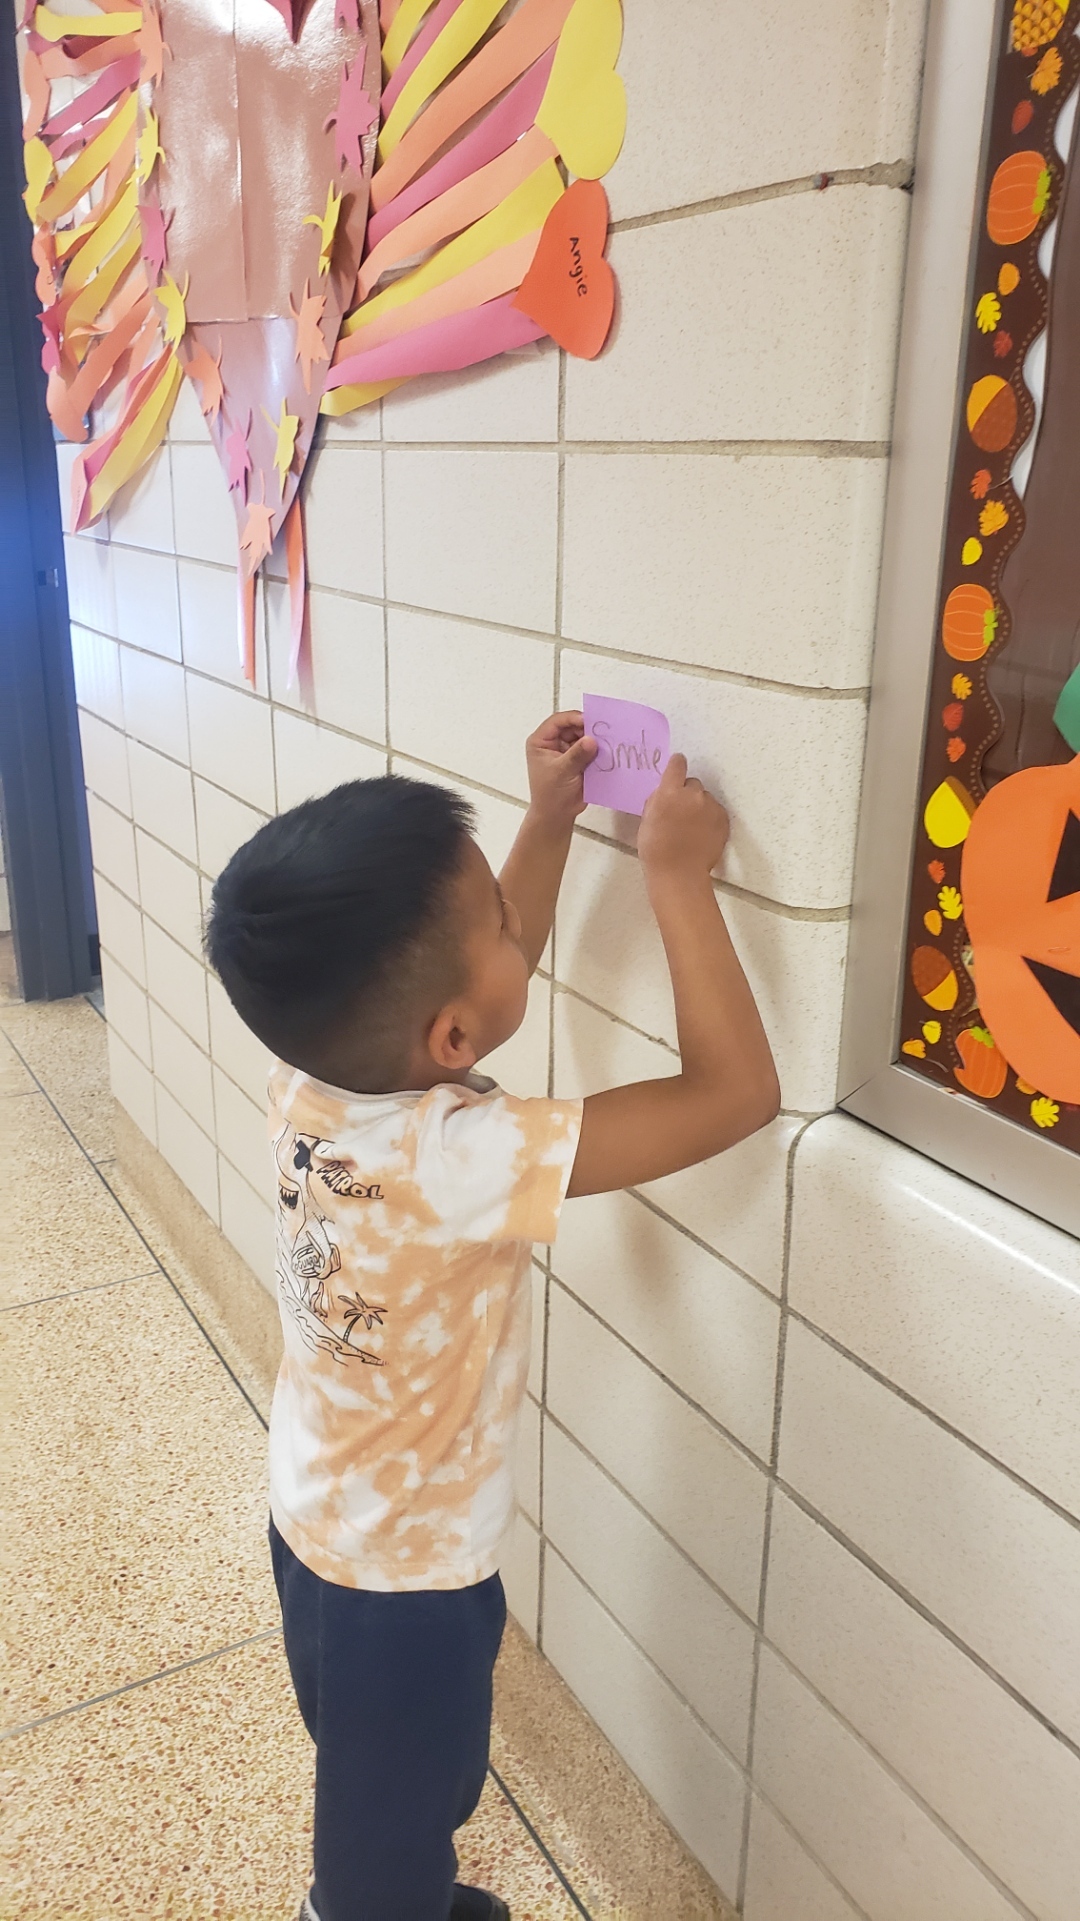 In honor of World Kindness Day, Hampton Bays Elementary School students in Becky Yakaboski’s class, including Erik Tenesaca Pacho, promoted positivity and kindness by sharing hundreds of Post-it notes around their school. The students wrote positive affirmations and created cheerful pictures to share as a surprise for their peers. COURTESY HAMPTON BAYS SCHOOL DISTRICT